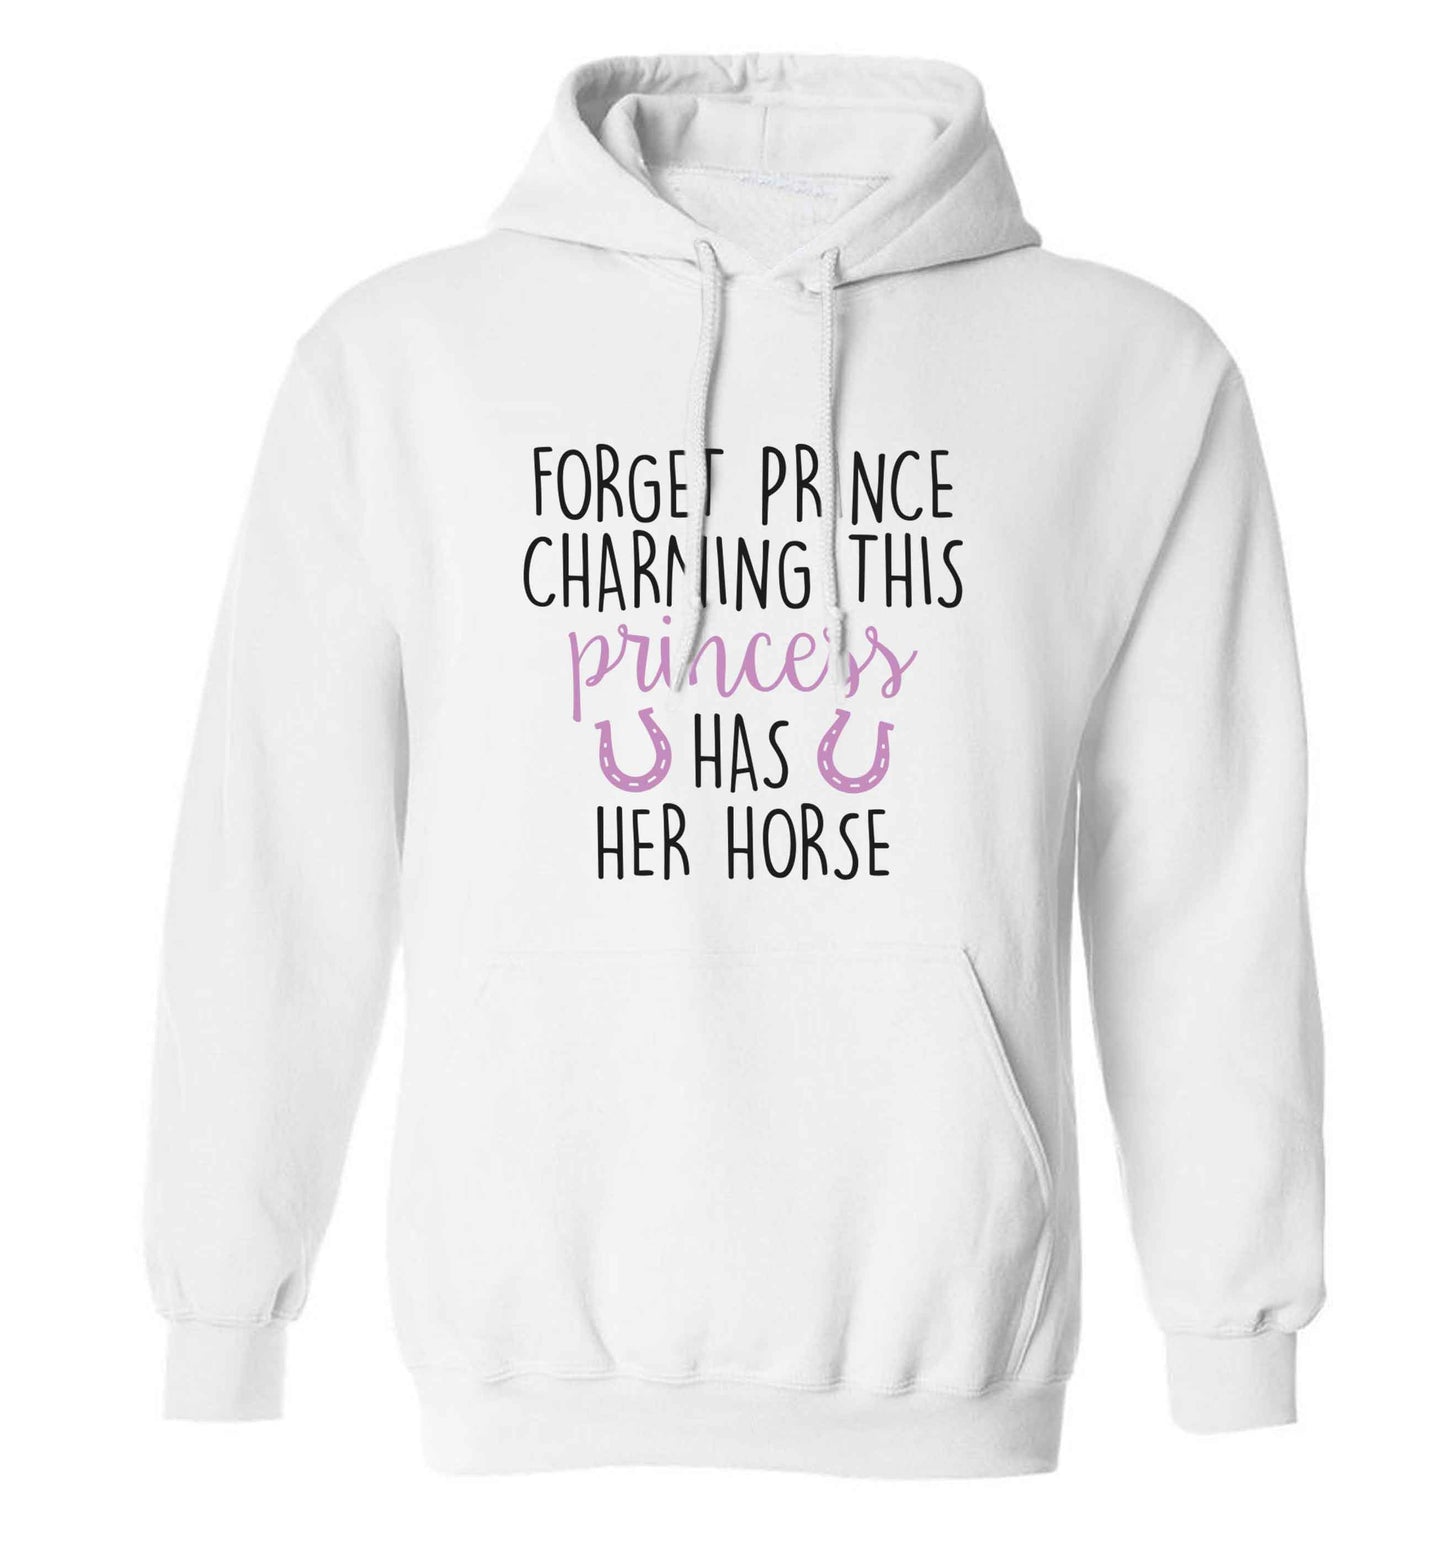 Forget prince charming this princess has her horse adults unisex white hoodie 2XL